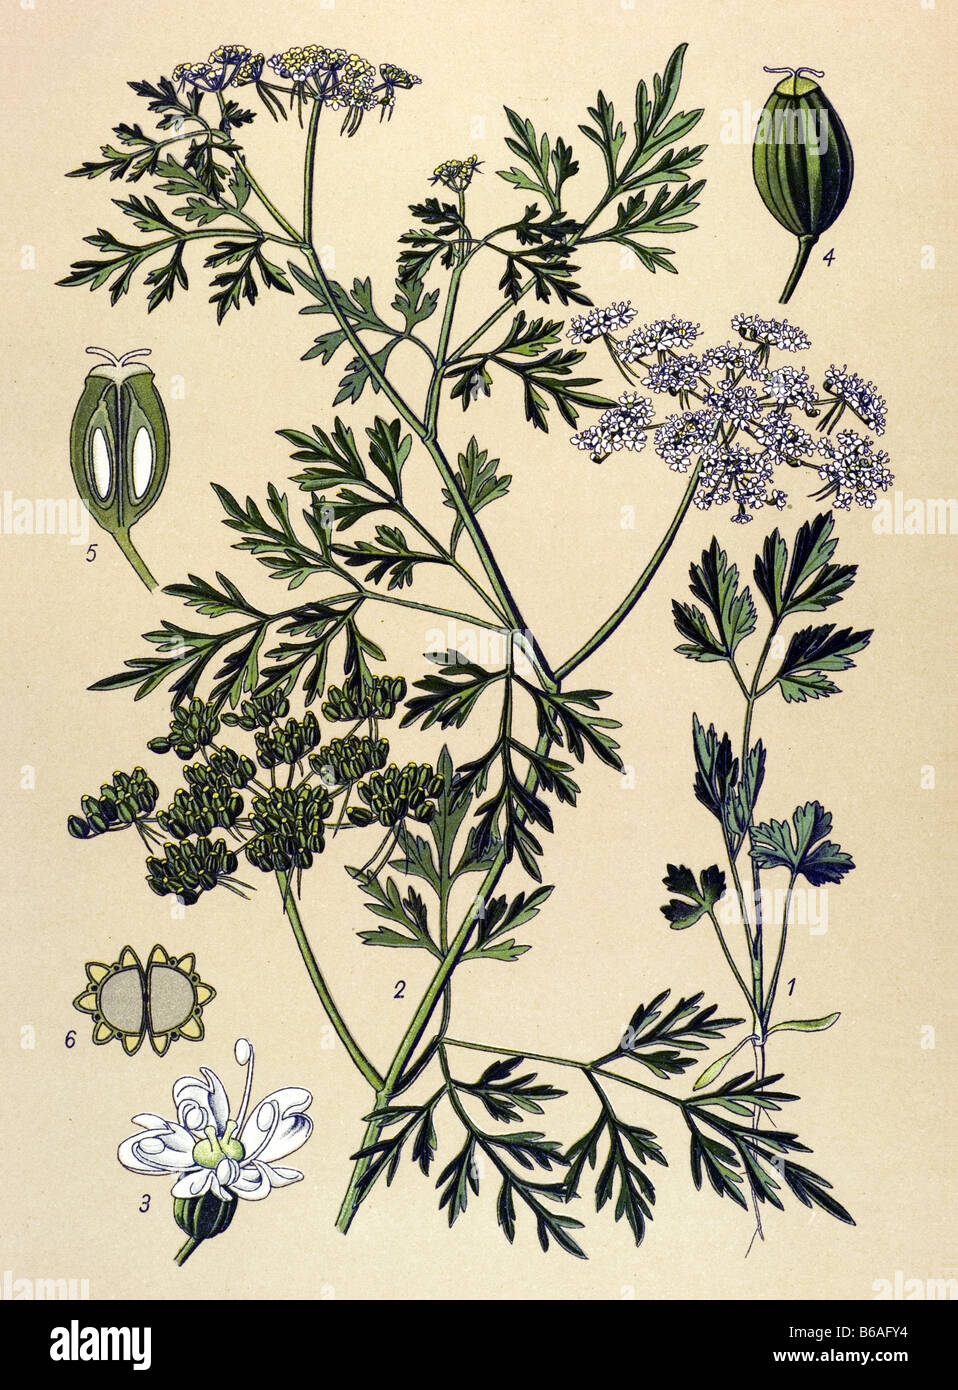 Fool's Parsley, Aethusa cynapium poisonous plants illustrations Stock Photo